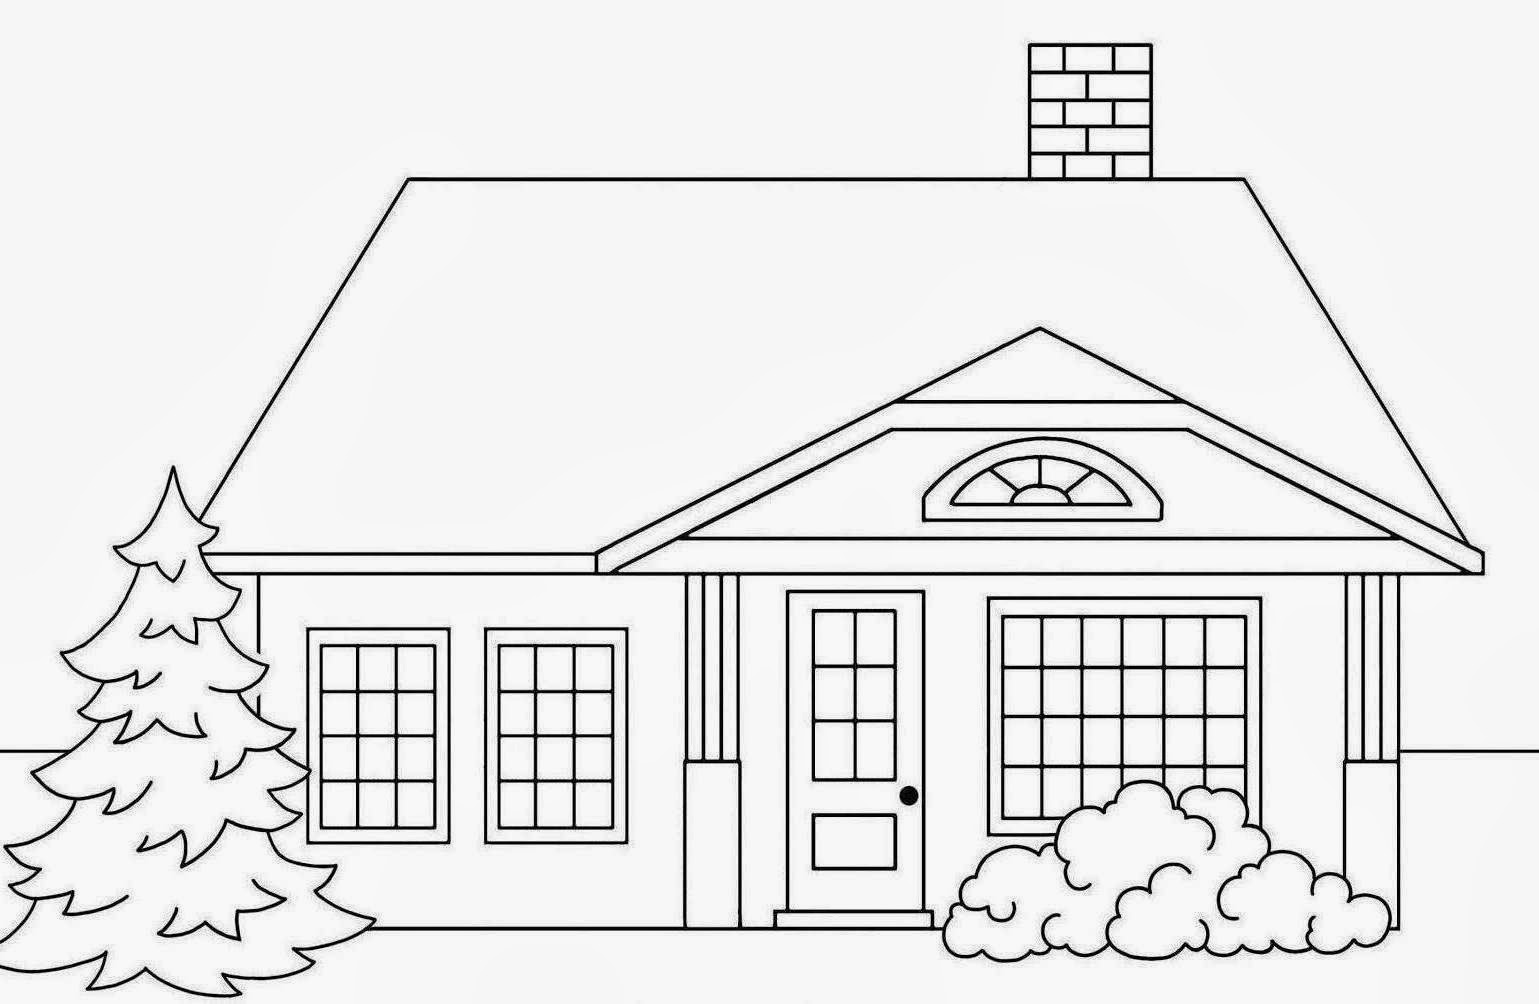 Draw A Big House 804376 Hd Wallpaper Backgrounds Download I am only 87 yrs old and have taken up colouring ( in pre drawn sketches) and like your presentation very much. hd wallpaper backgrounds download